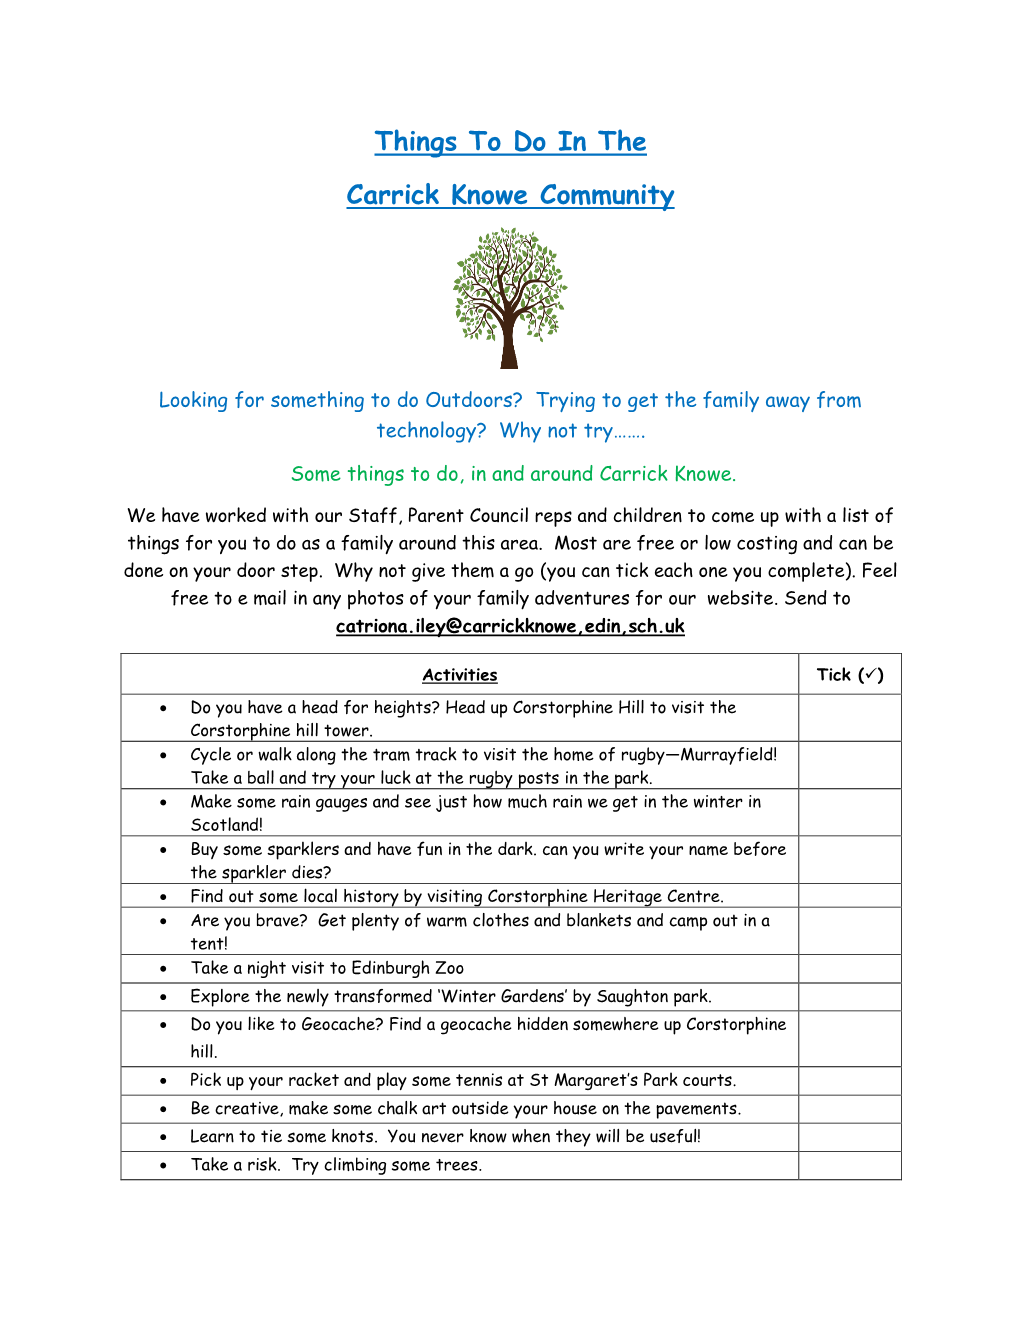 Things to Do in the Carrick Knowe Community